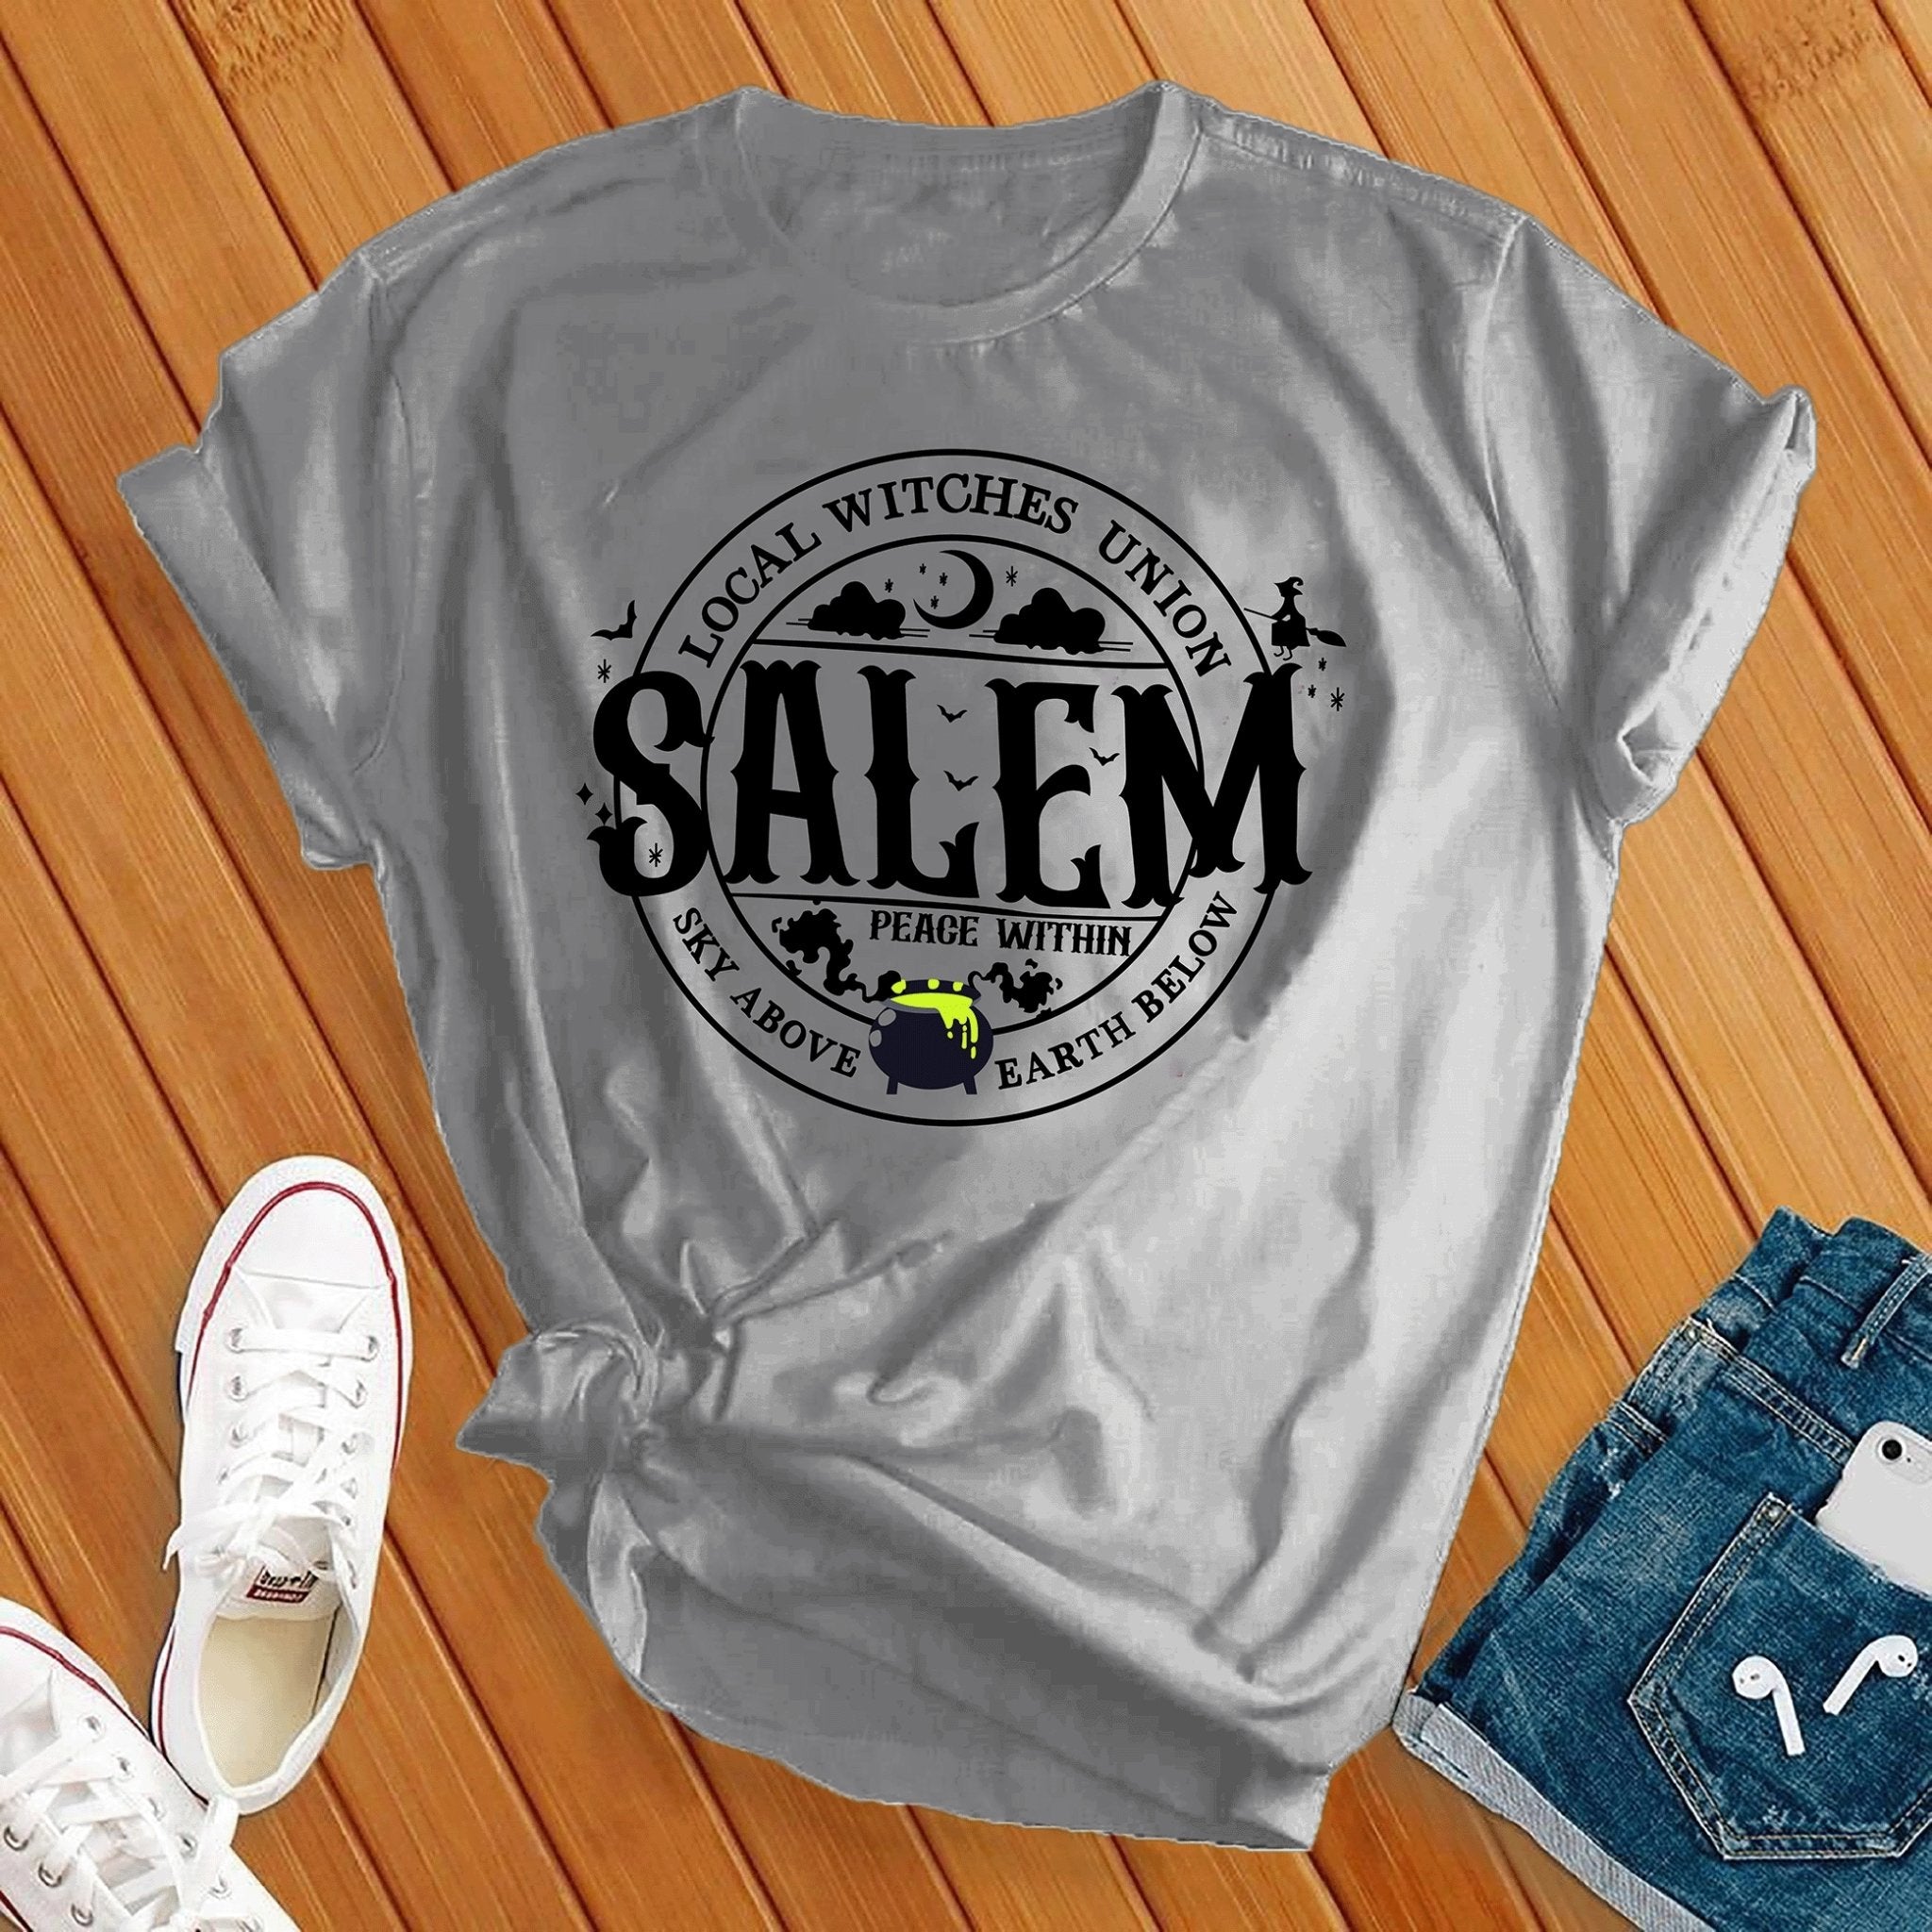 Local Witches Union Salem Tee - Love Tees